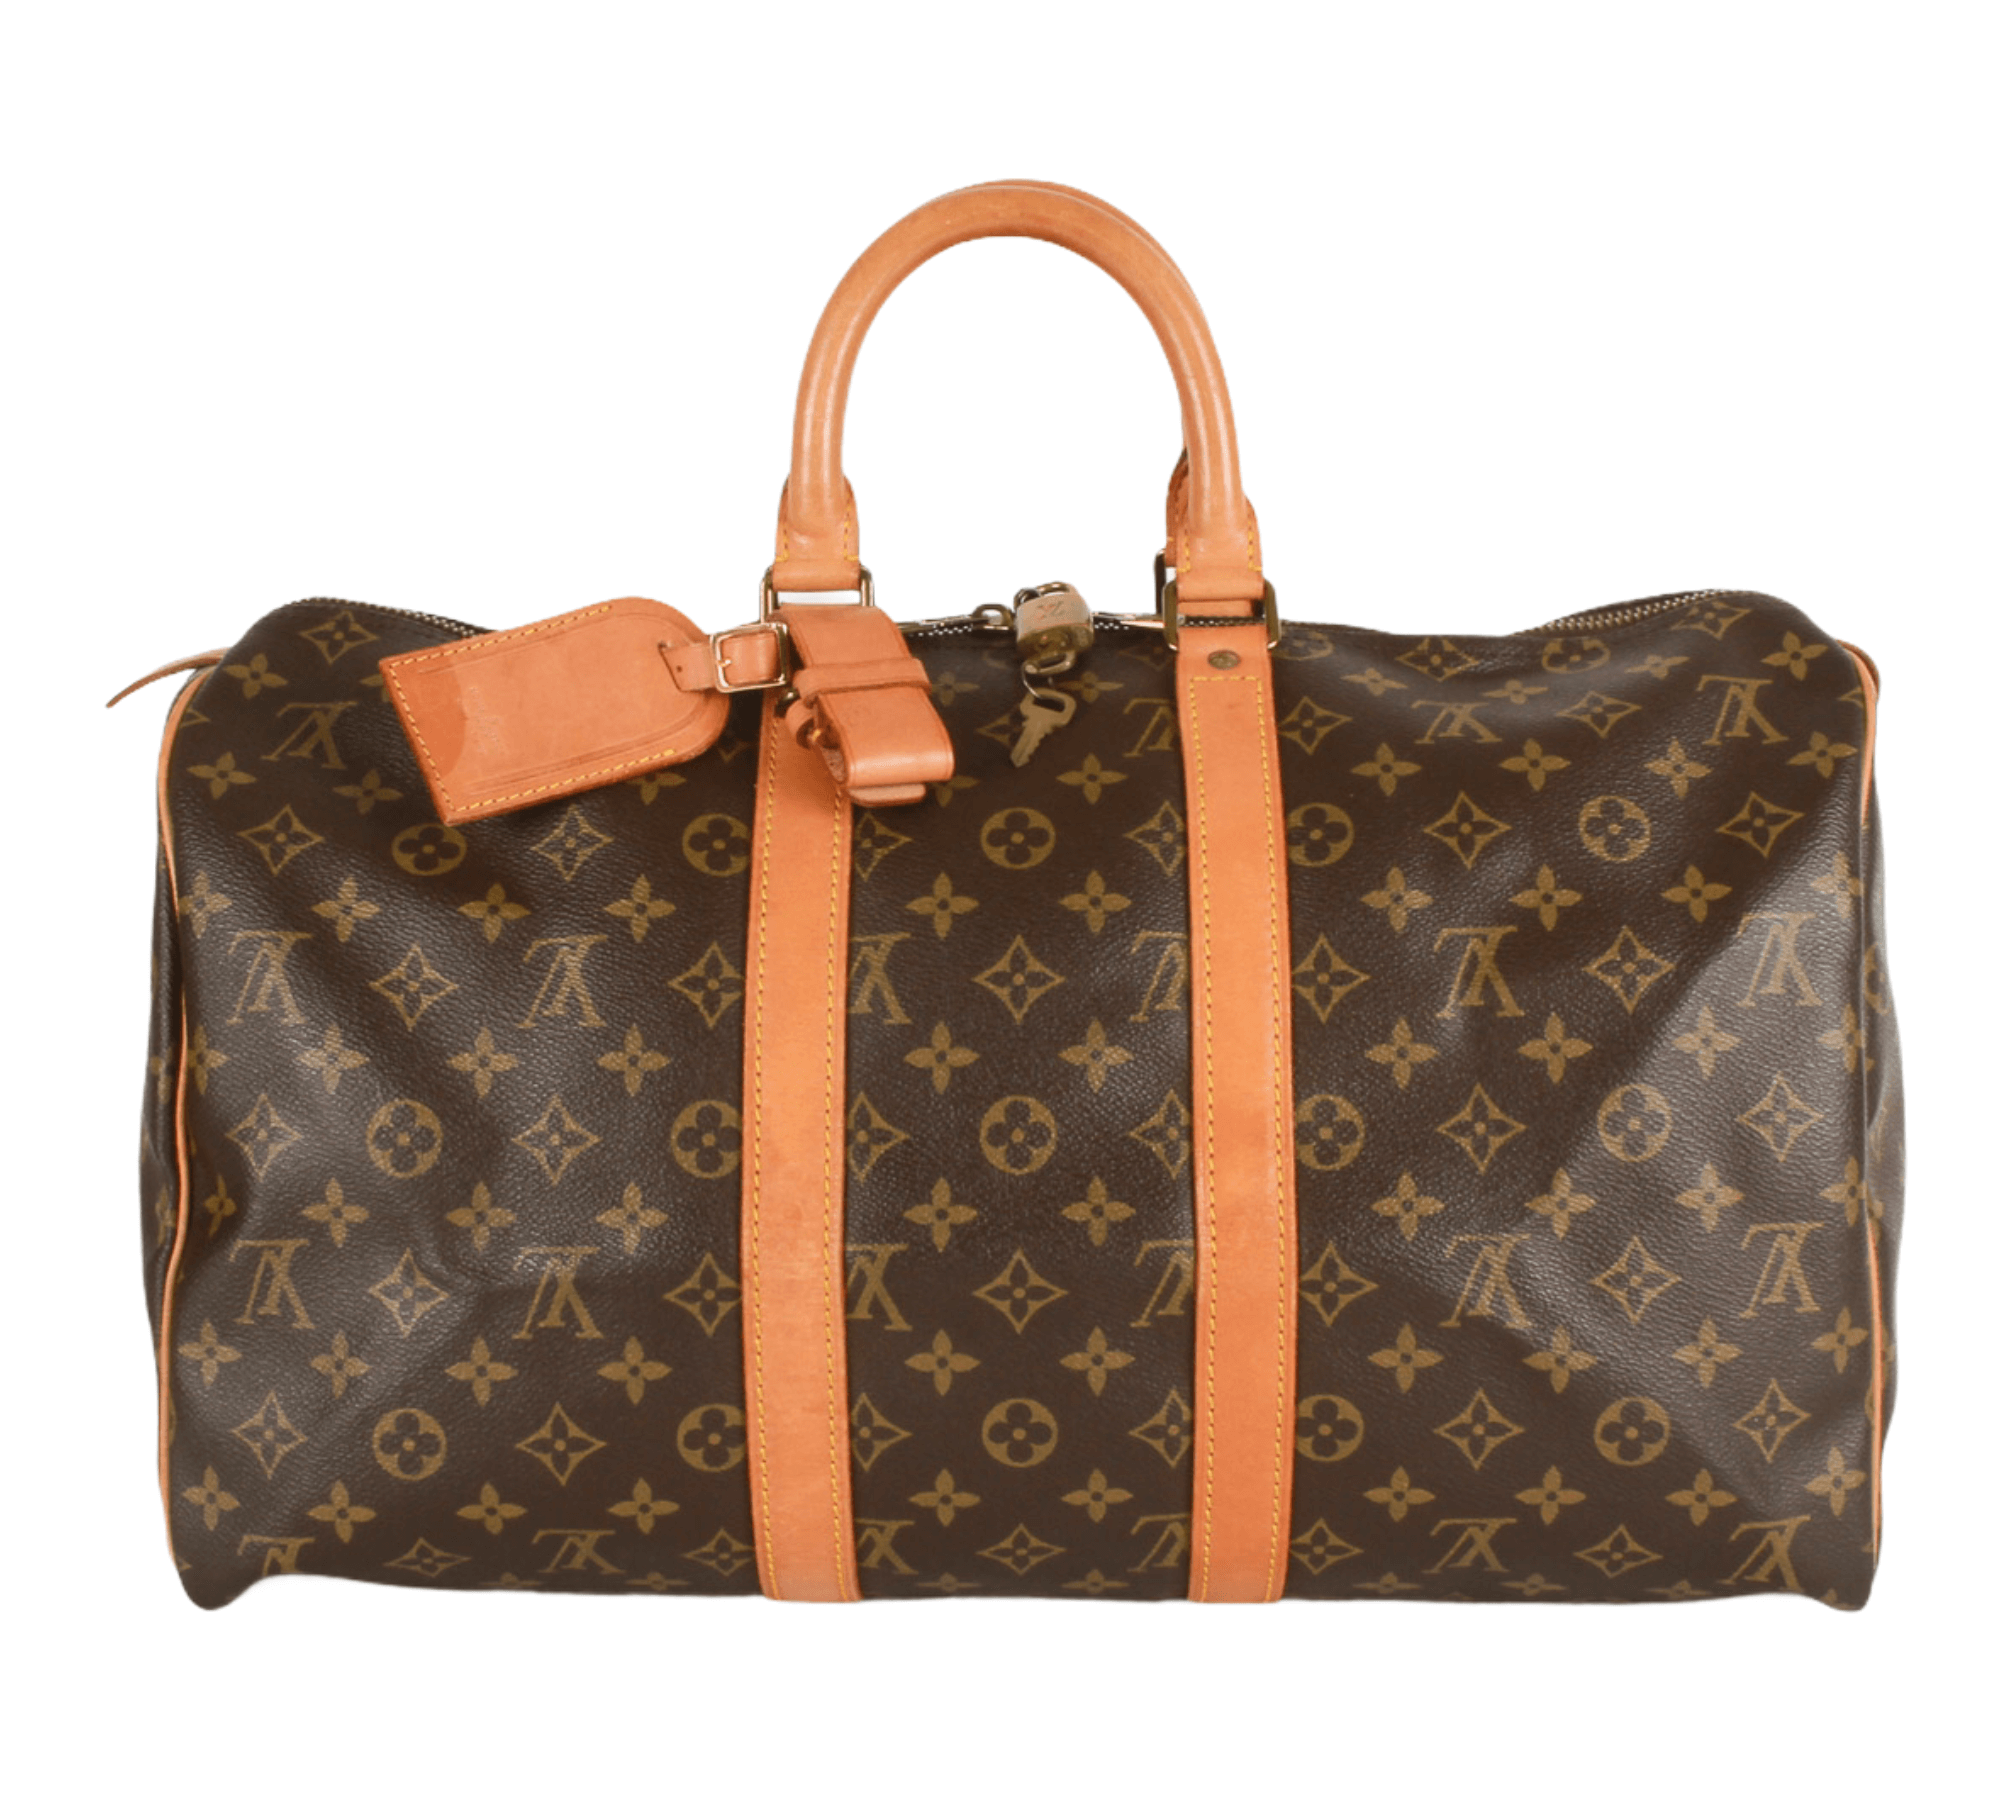 Authentic Louis Vuitton Monogram Keepall 45 Travel Carry On Bag